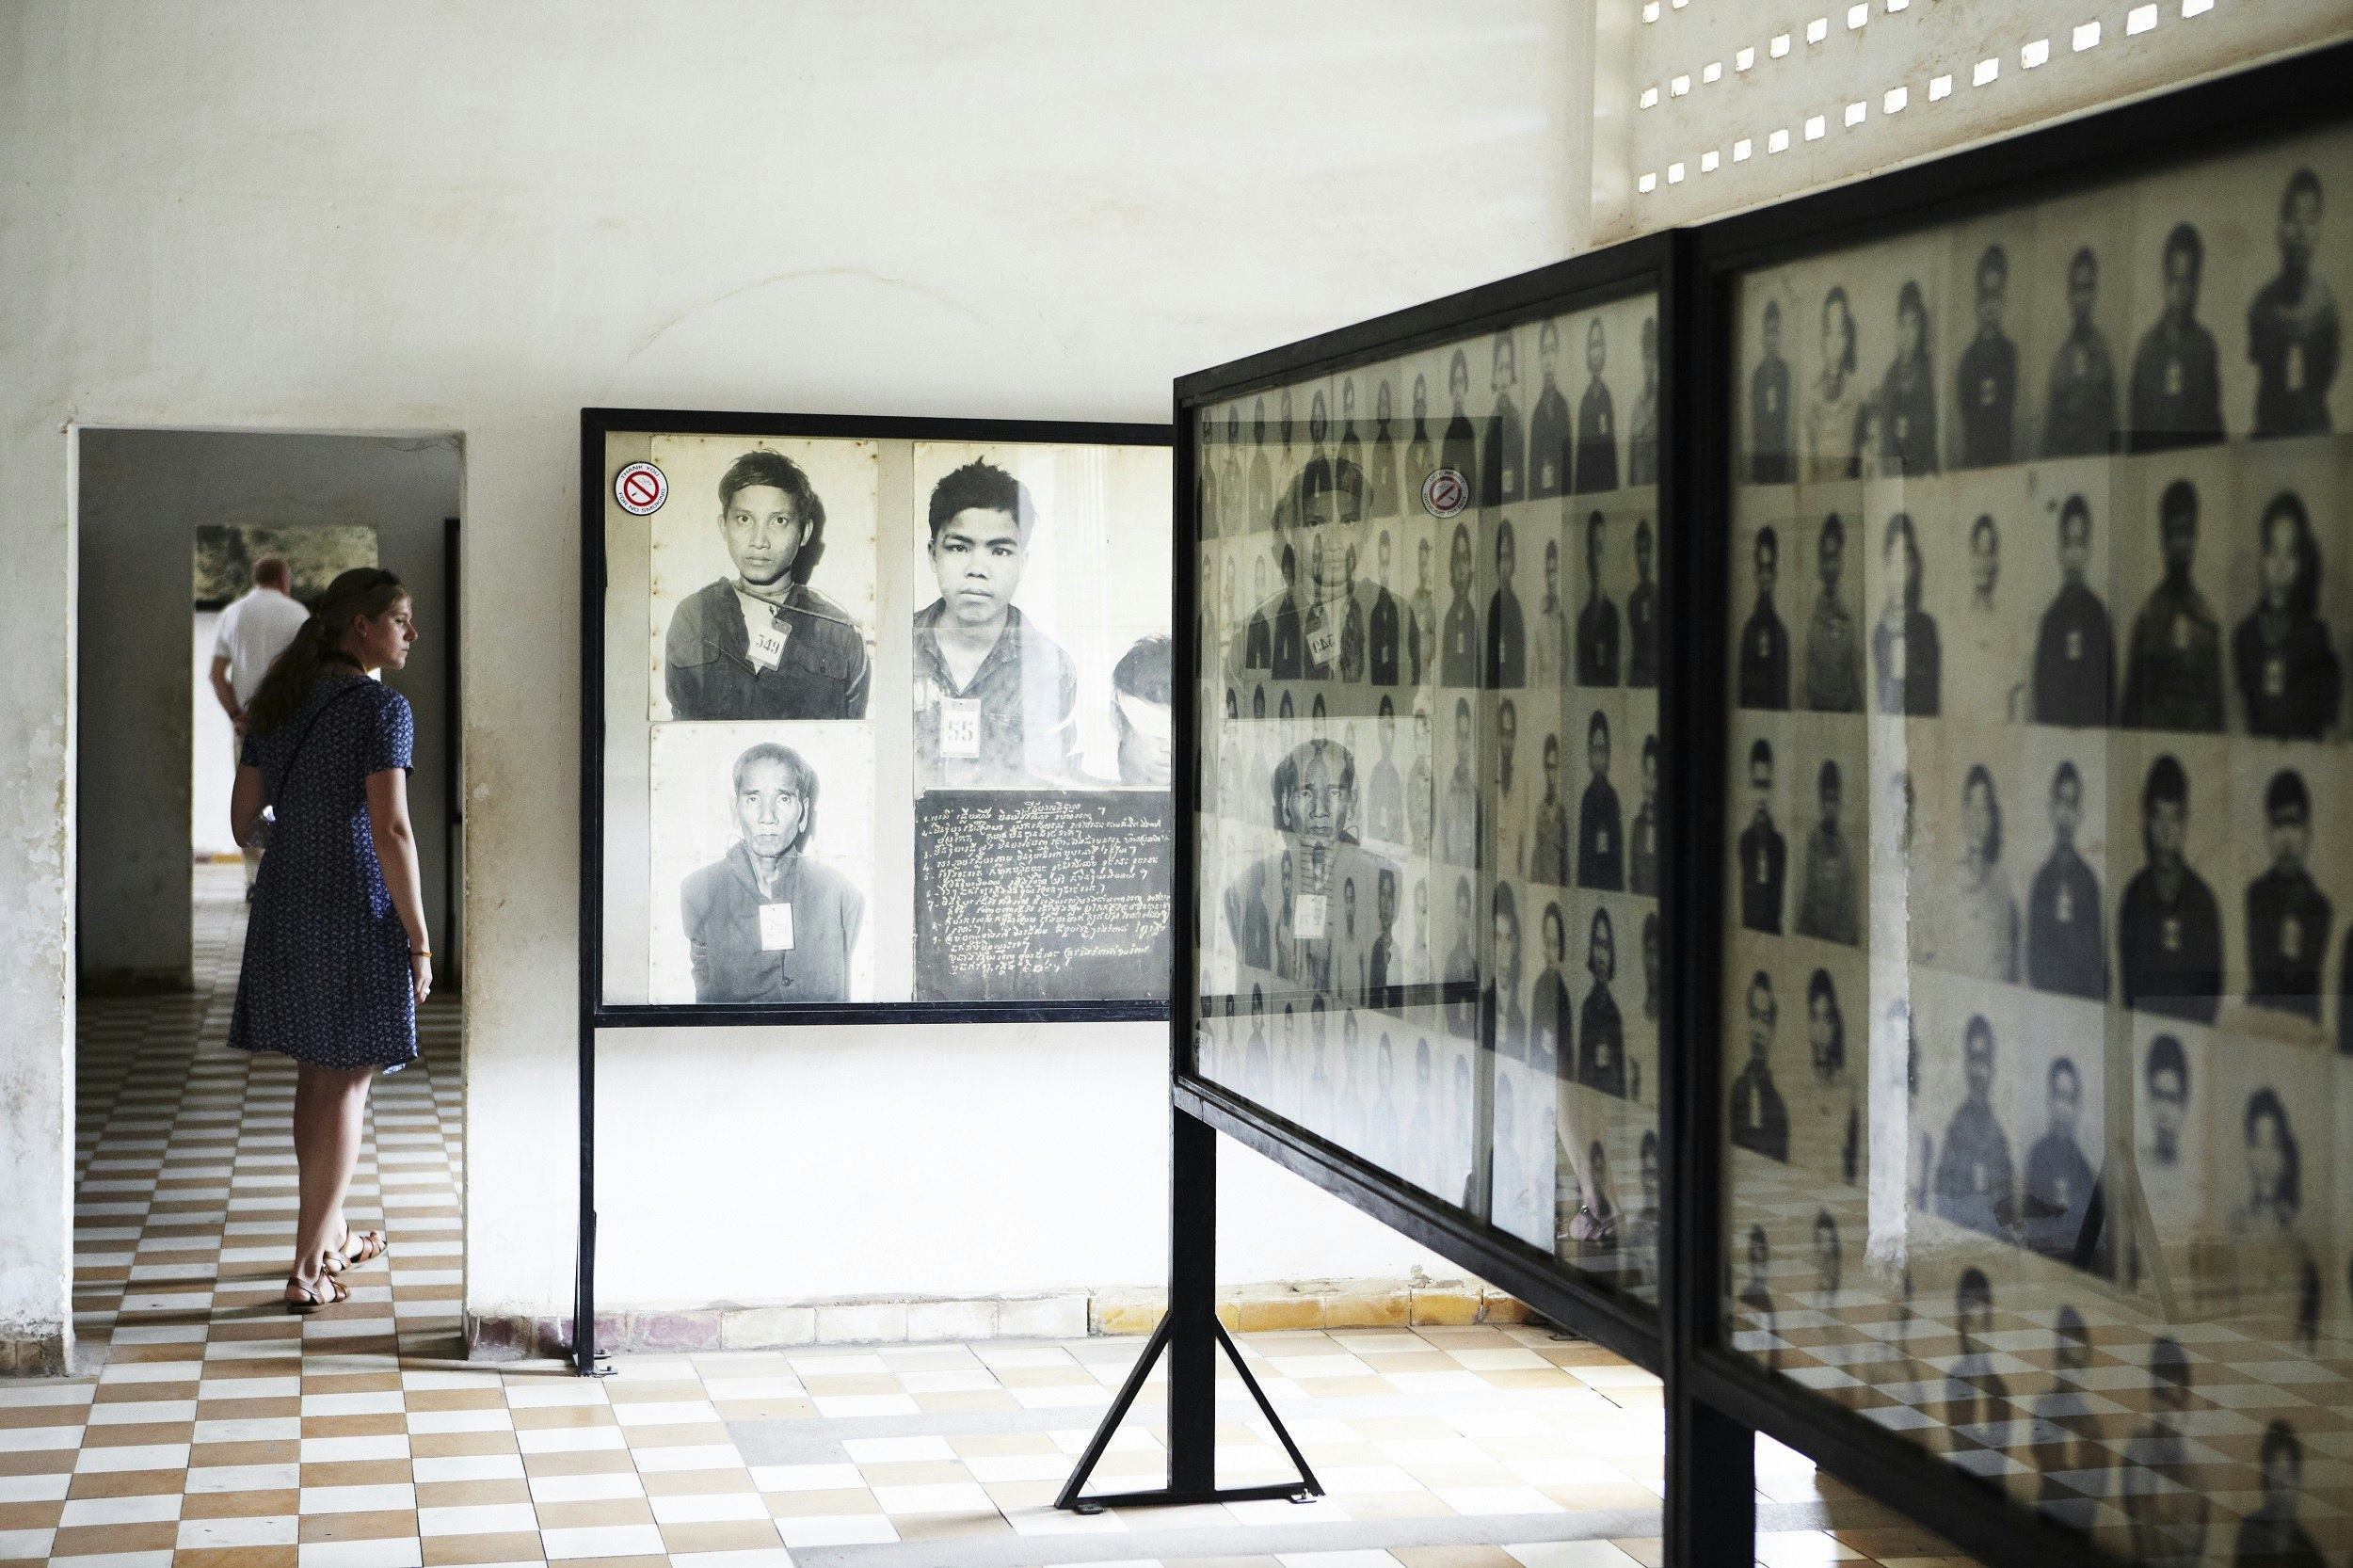 A room with walls and a central display covered with black-and-white head shots of people.